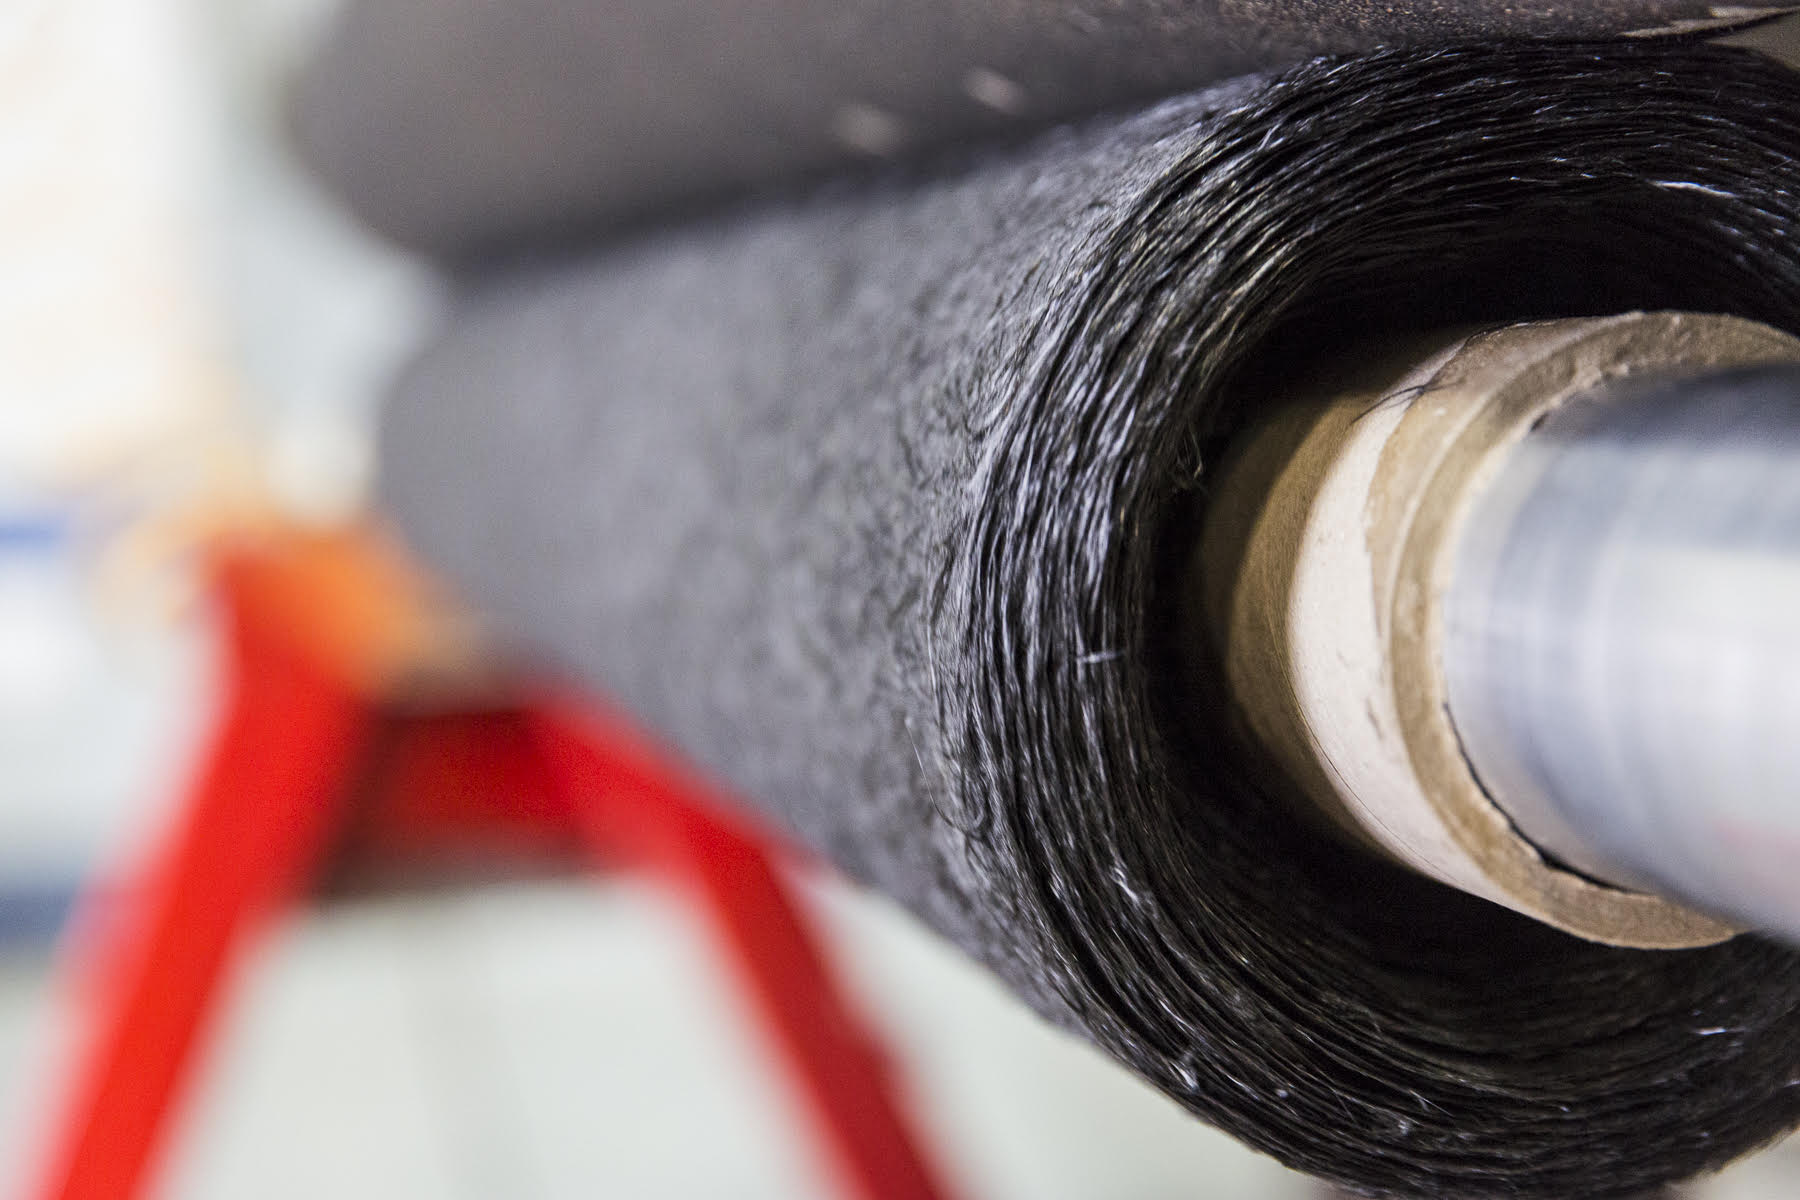 Carbon Conversions Granted U.S. Patent for Reclaimed Carbon Fiber Nonwoven Technology